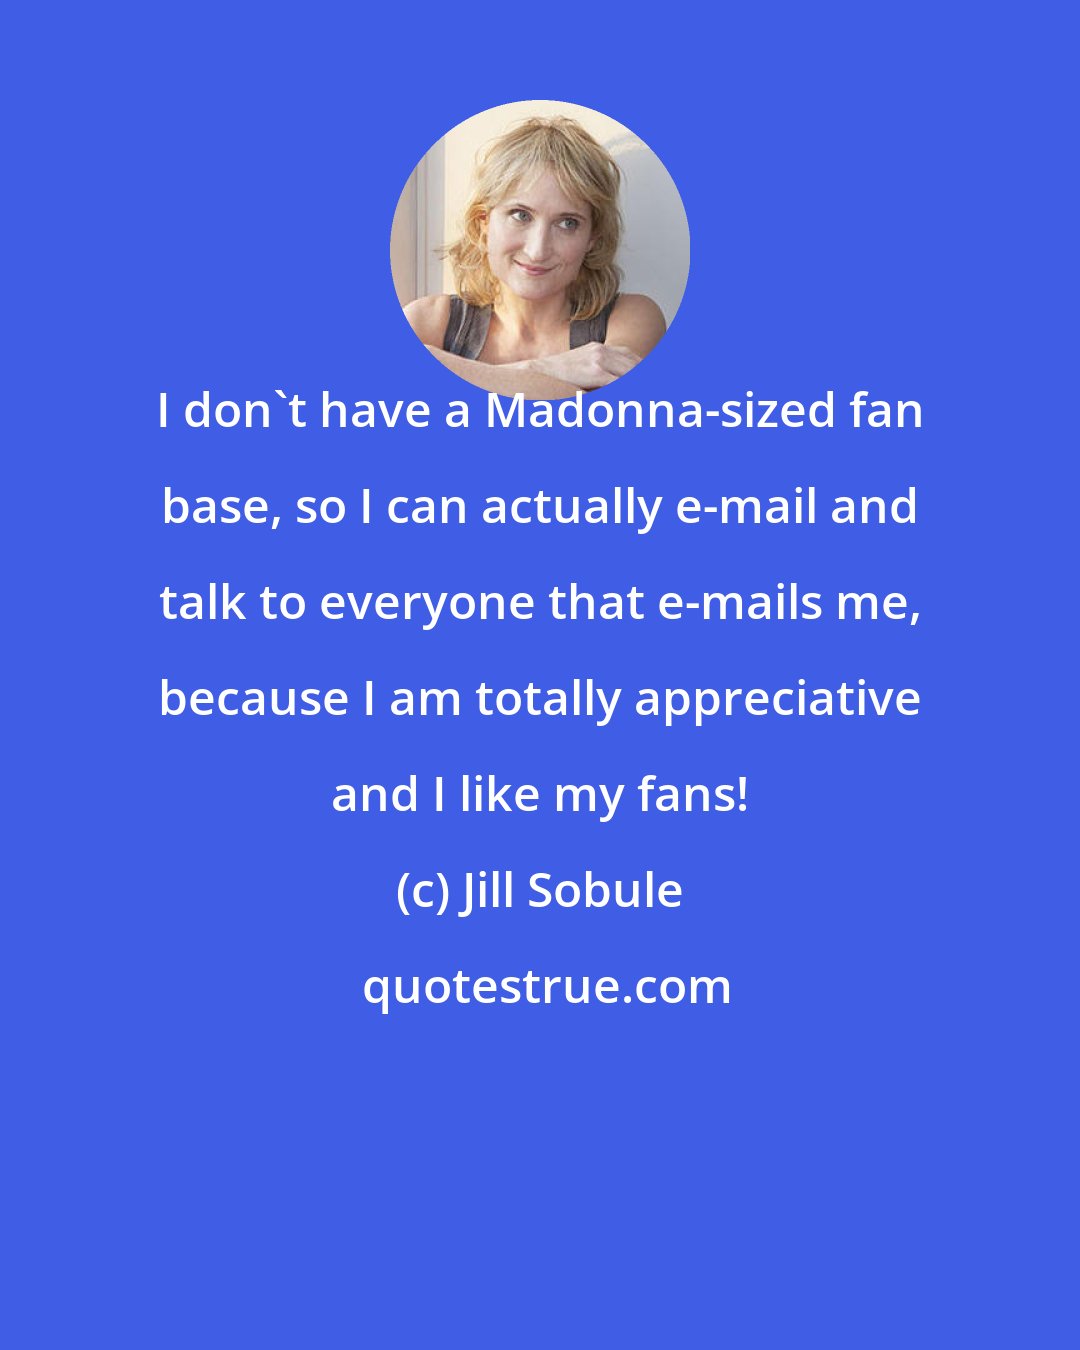 Jill Sobule: I don't have a Madonna-sized fan base, so I can actually e-mail and talk to everyone that e-mails me, because I am totally appreciative and I like my fans!